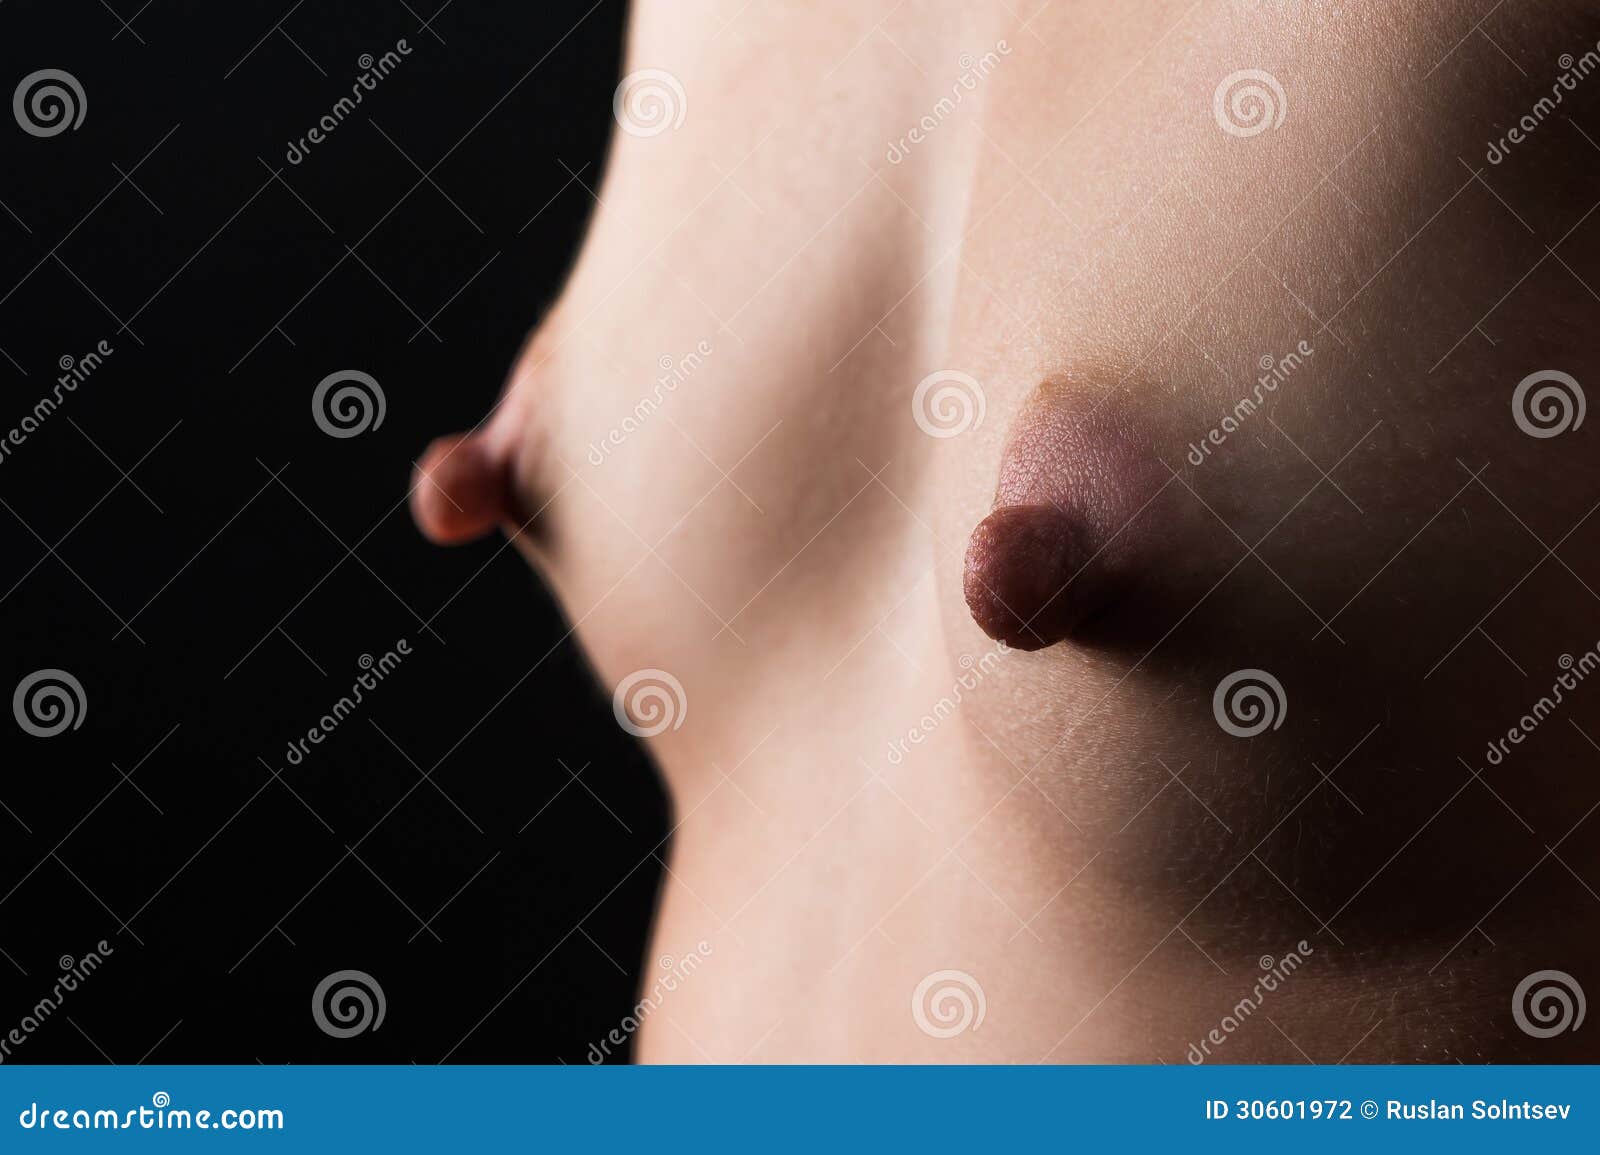 Small Breasts with Large Nipples Closeup Stock Photo - Image of